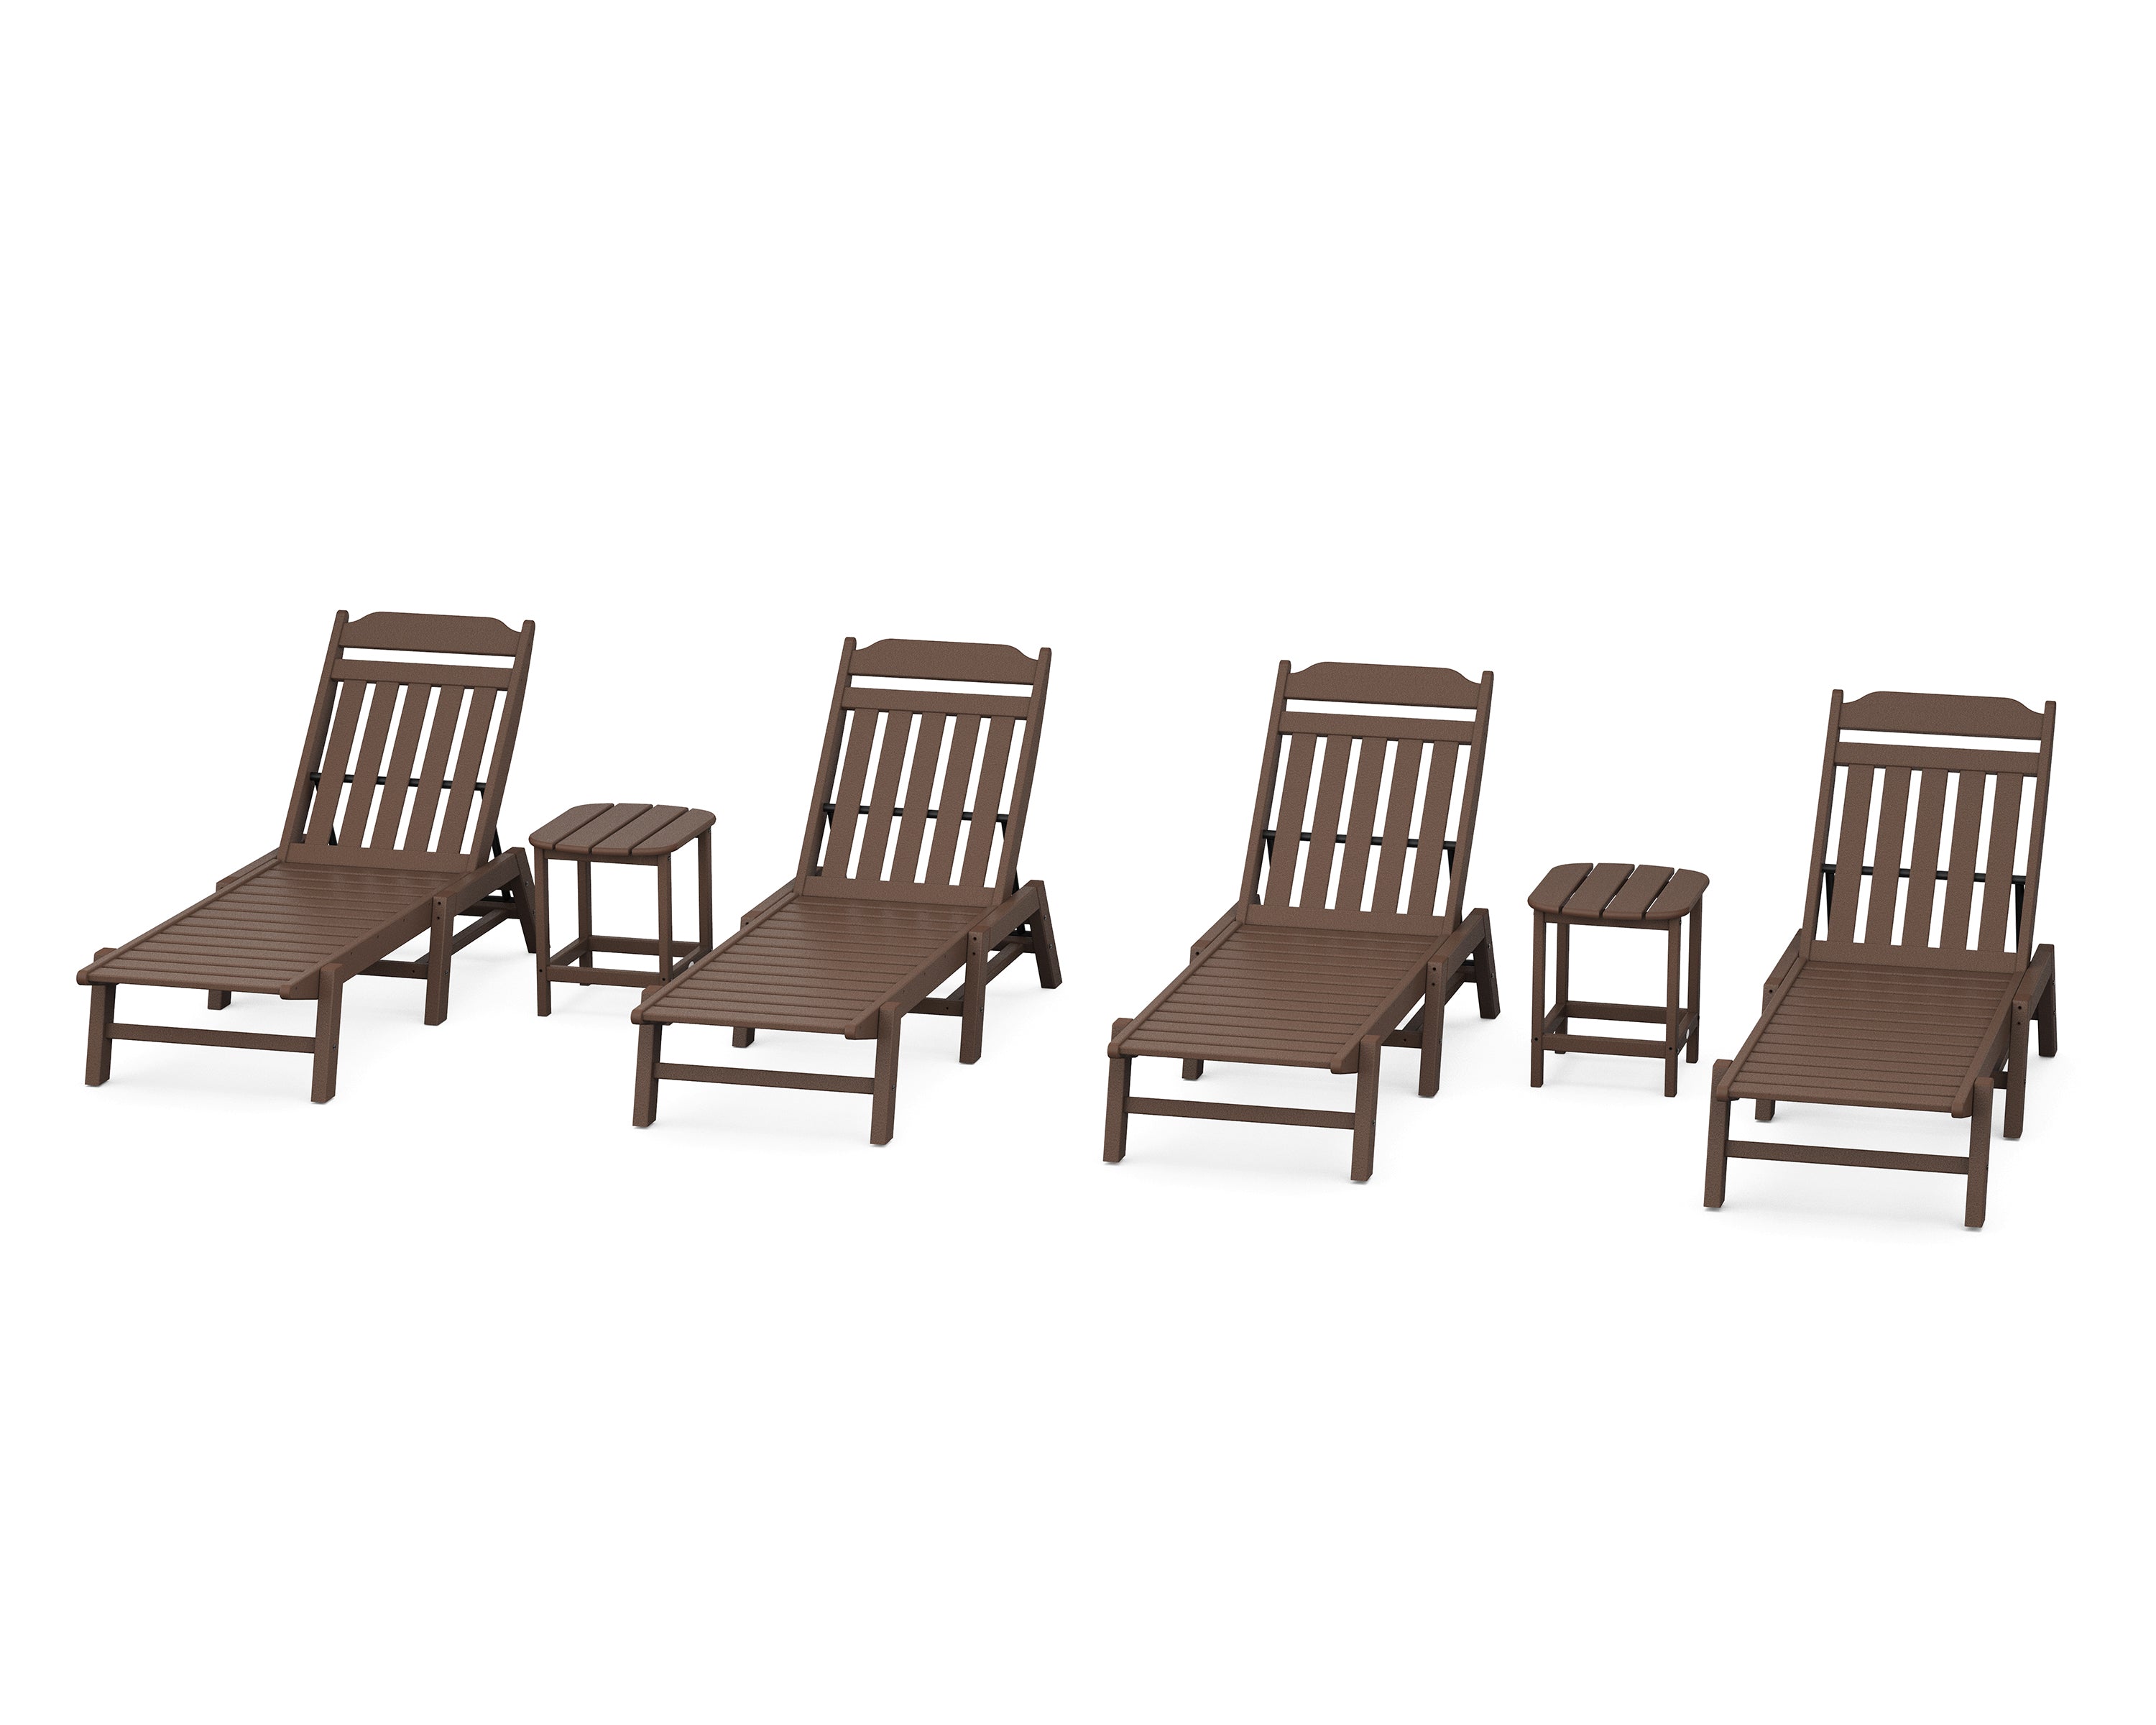 POLYWOOD Country Living 6-Piece Chaise Set in Mahogany